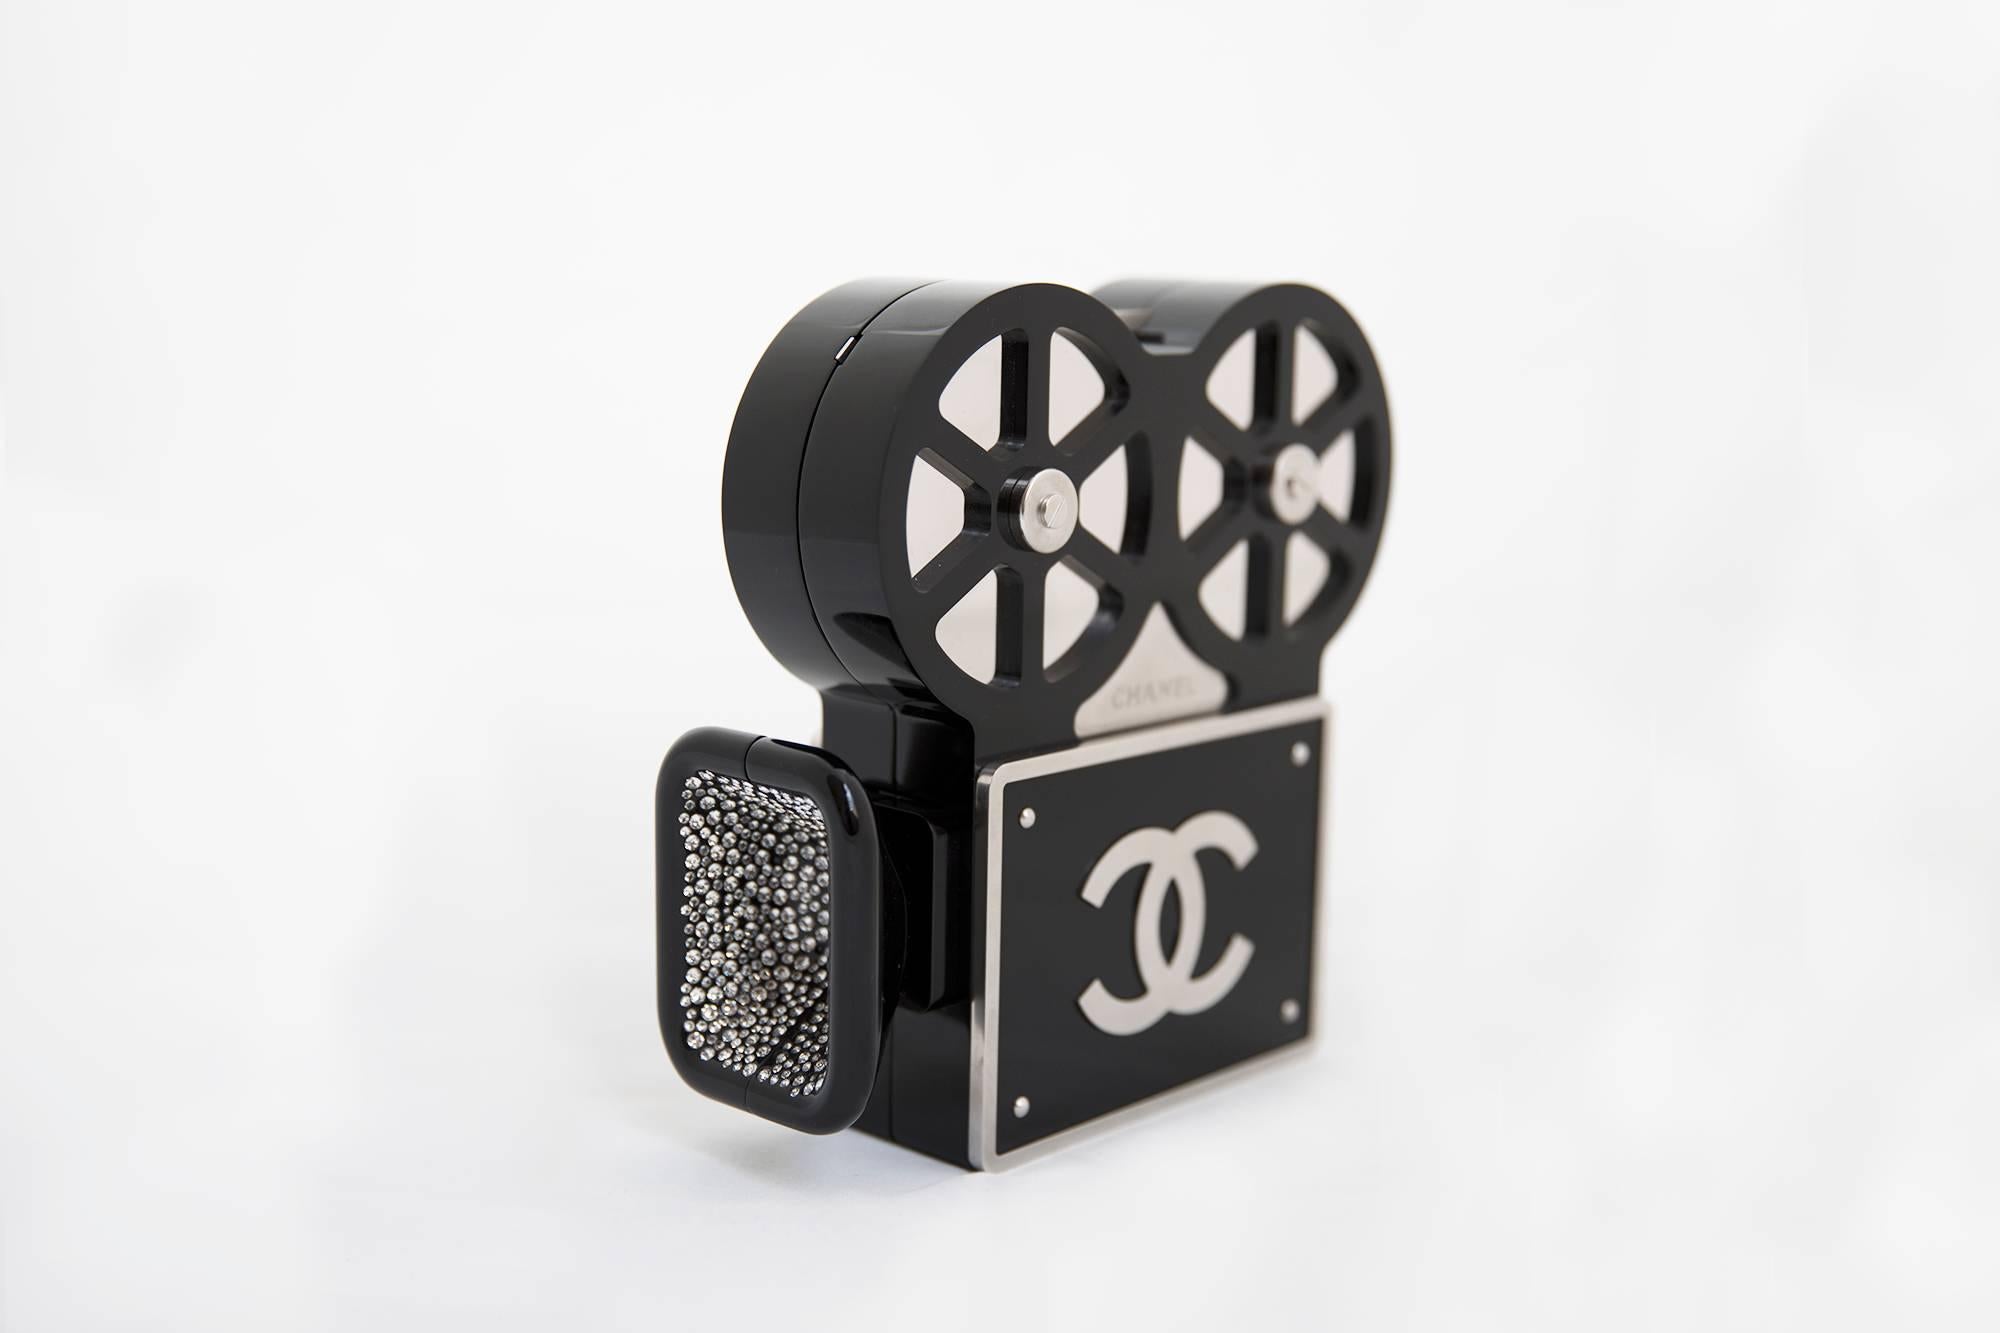 Chanel’s Paris in Rome Métiers d’Art Pre-Fall 2016 collection came to life in Cinecittà, Italy’s famous film studios. One of the most coveted pieces to come from the runway show was the film camera minaudière. Taking inspiration from the shape of an